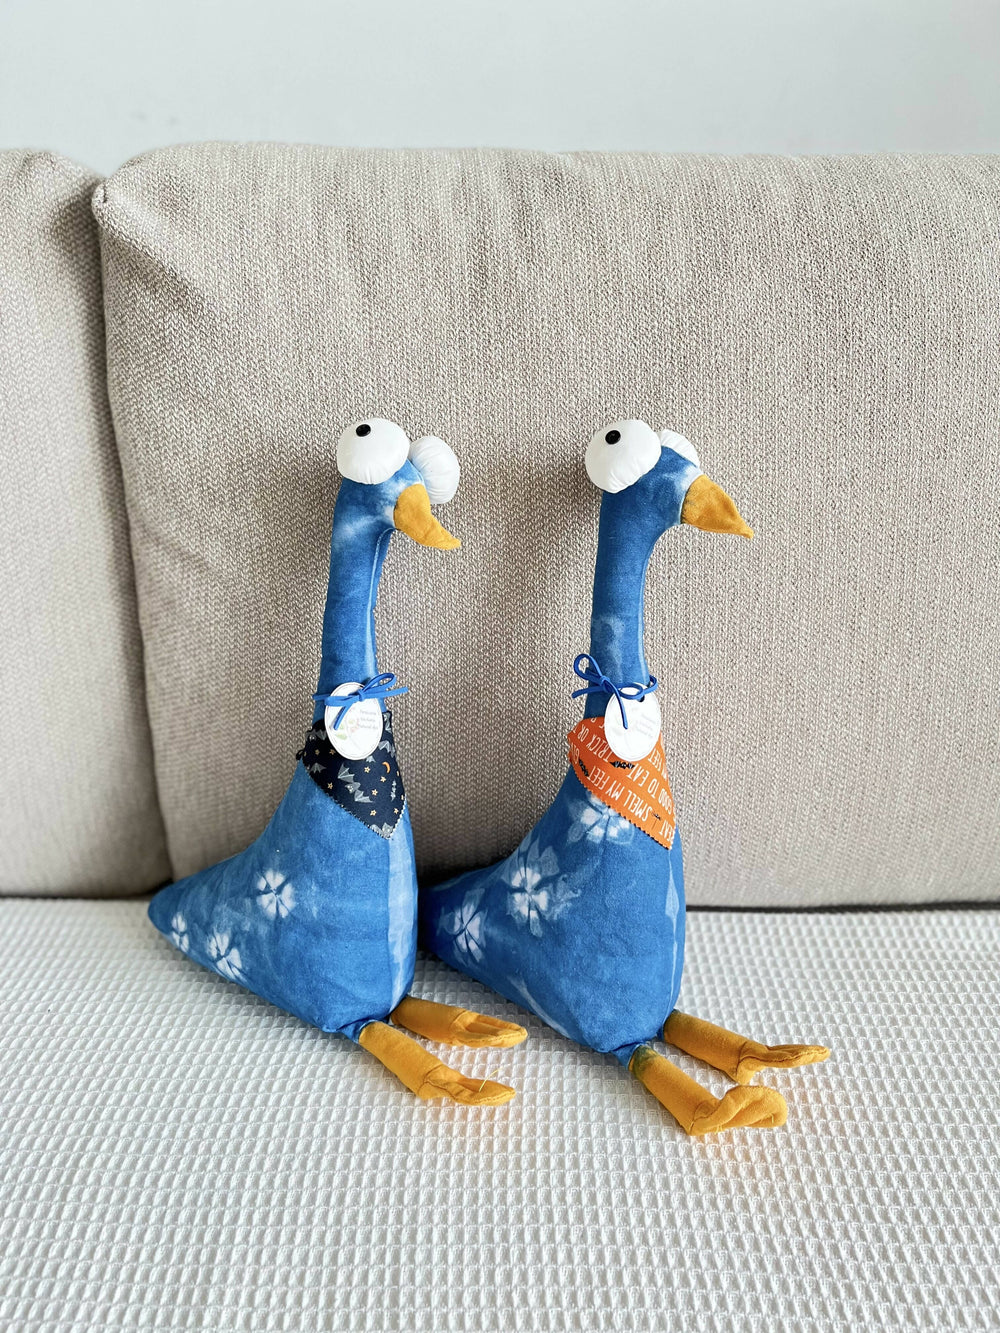 Natural indigo dye shocked duck dolls with floral scarf / cute stuffed soft duck toy / funny duck baby. An unique birthday / new born gift. Scarfs Blue Bee Tie Dye 